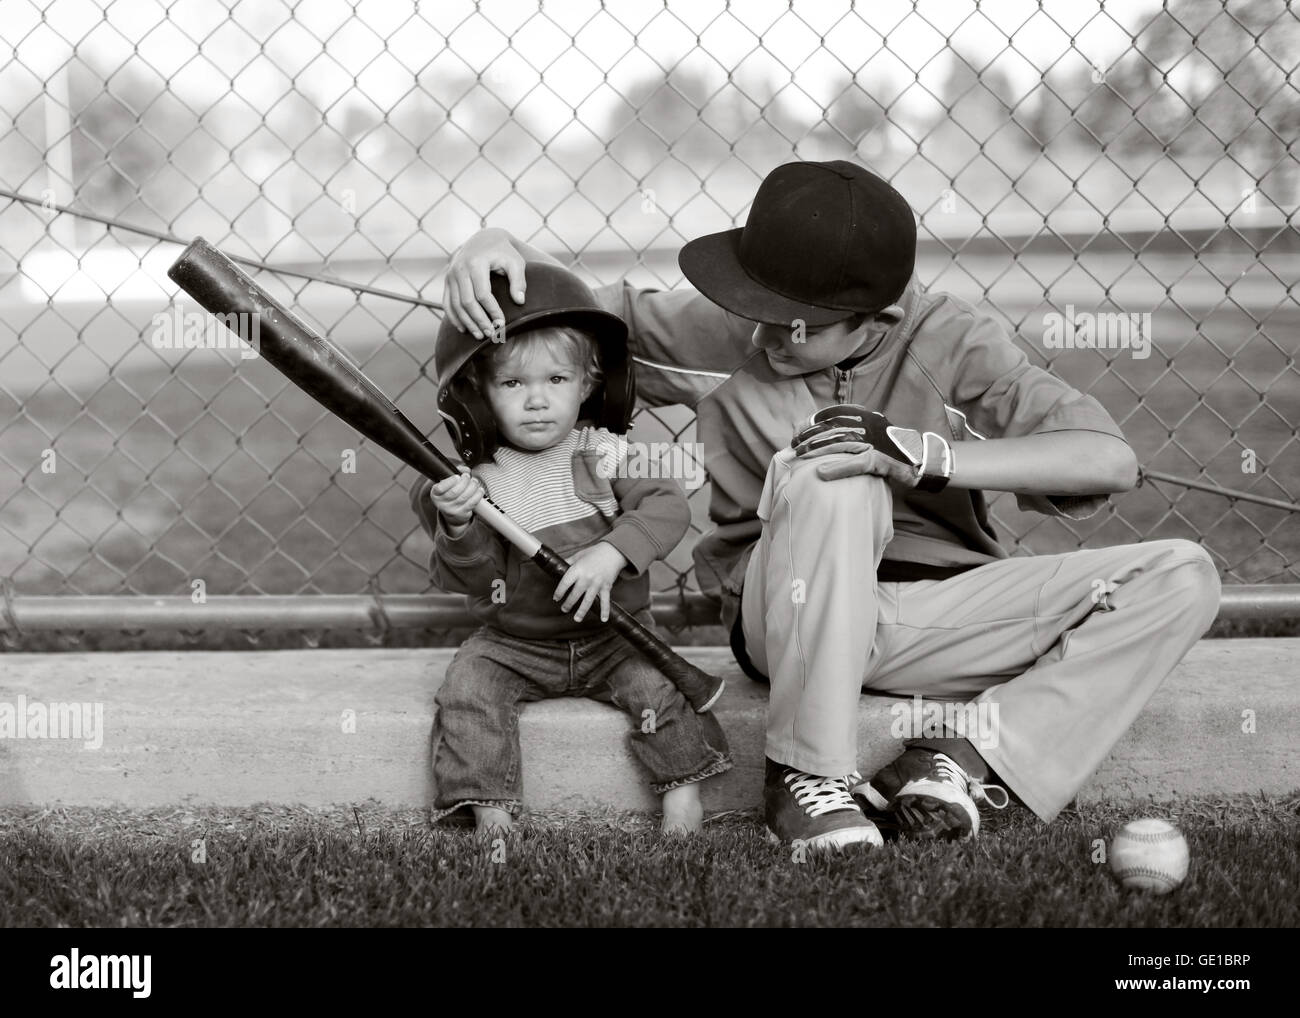 Two boys sitting in baseball park with one Boy wearing his brother's baseball hat Stock Photo